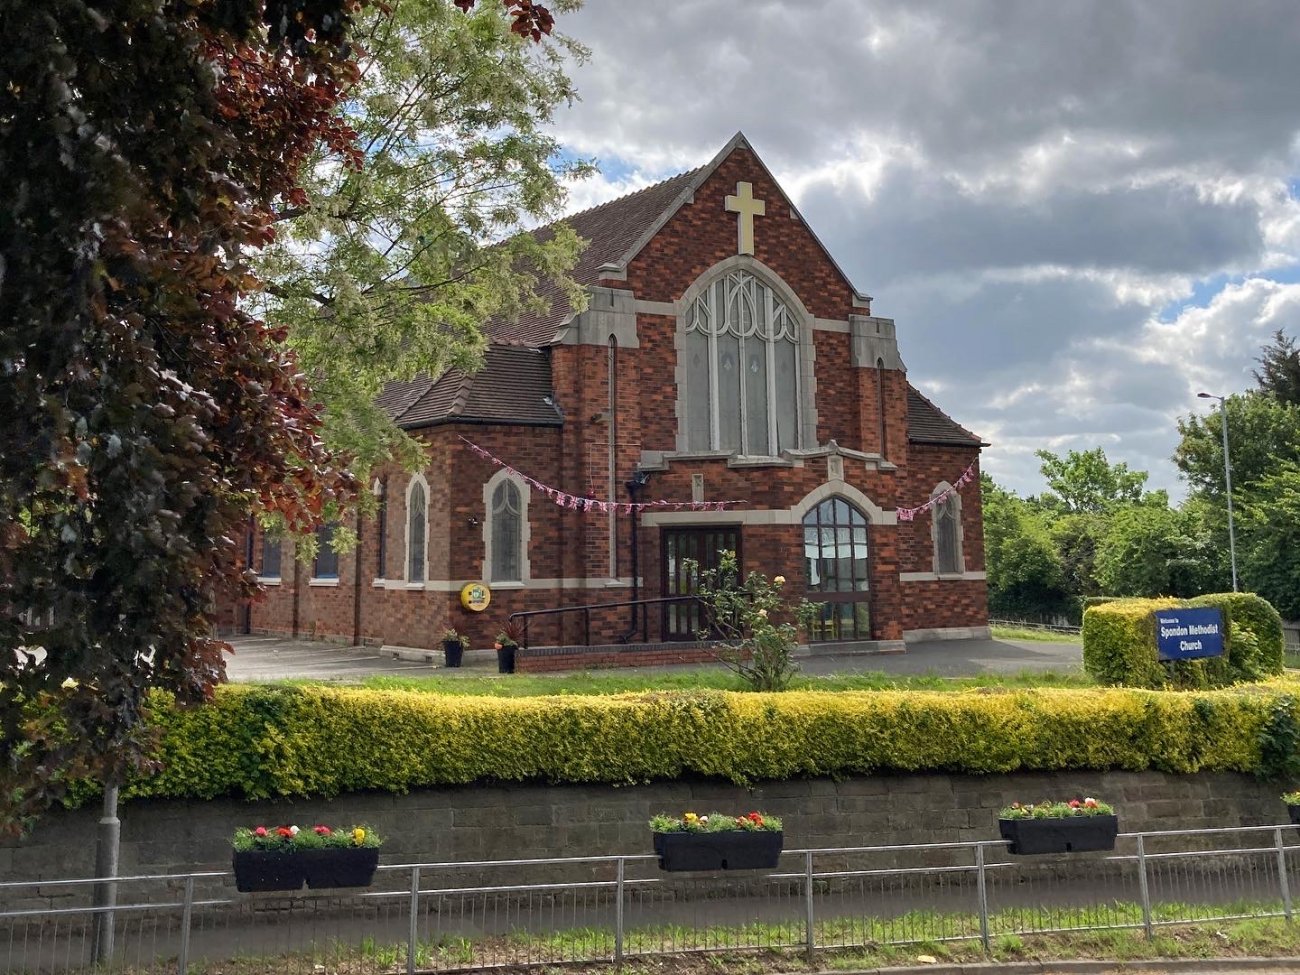 Photograph of Spondon Methodist Church decorated for the Queen's Platinum Jubilee